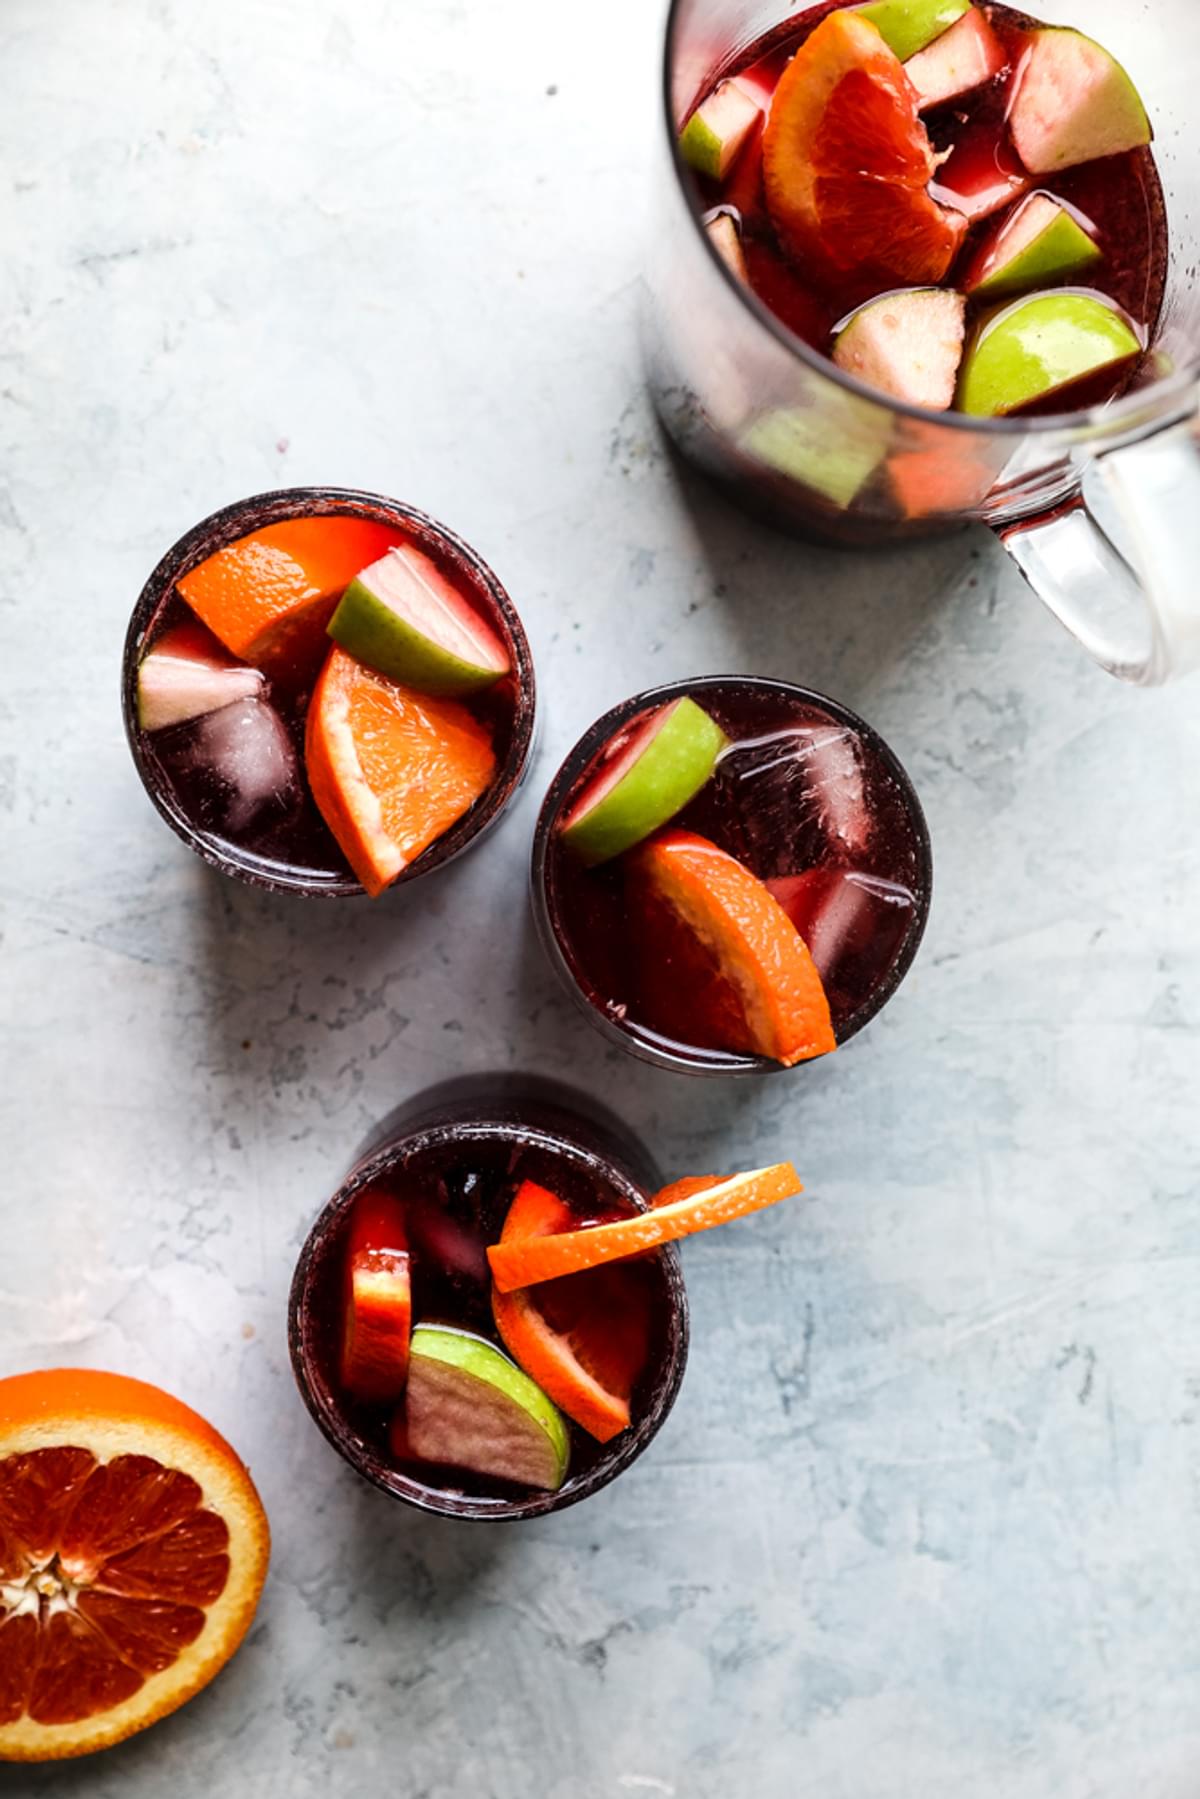 Homemade Red Wine Sangria Recipe with cinnamon, apples, oranges, brandy and triple sec.